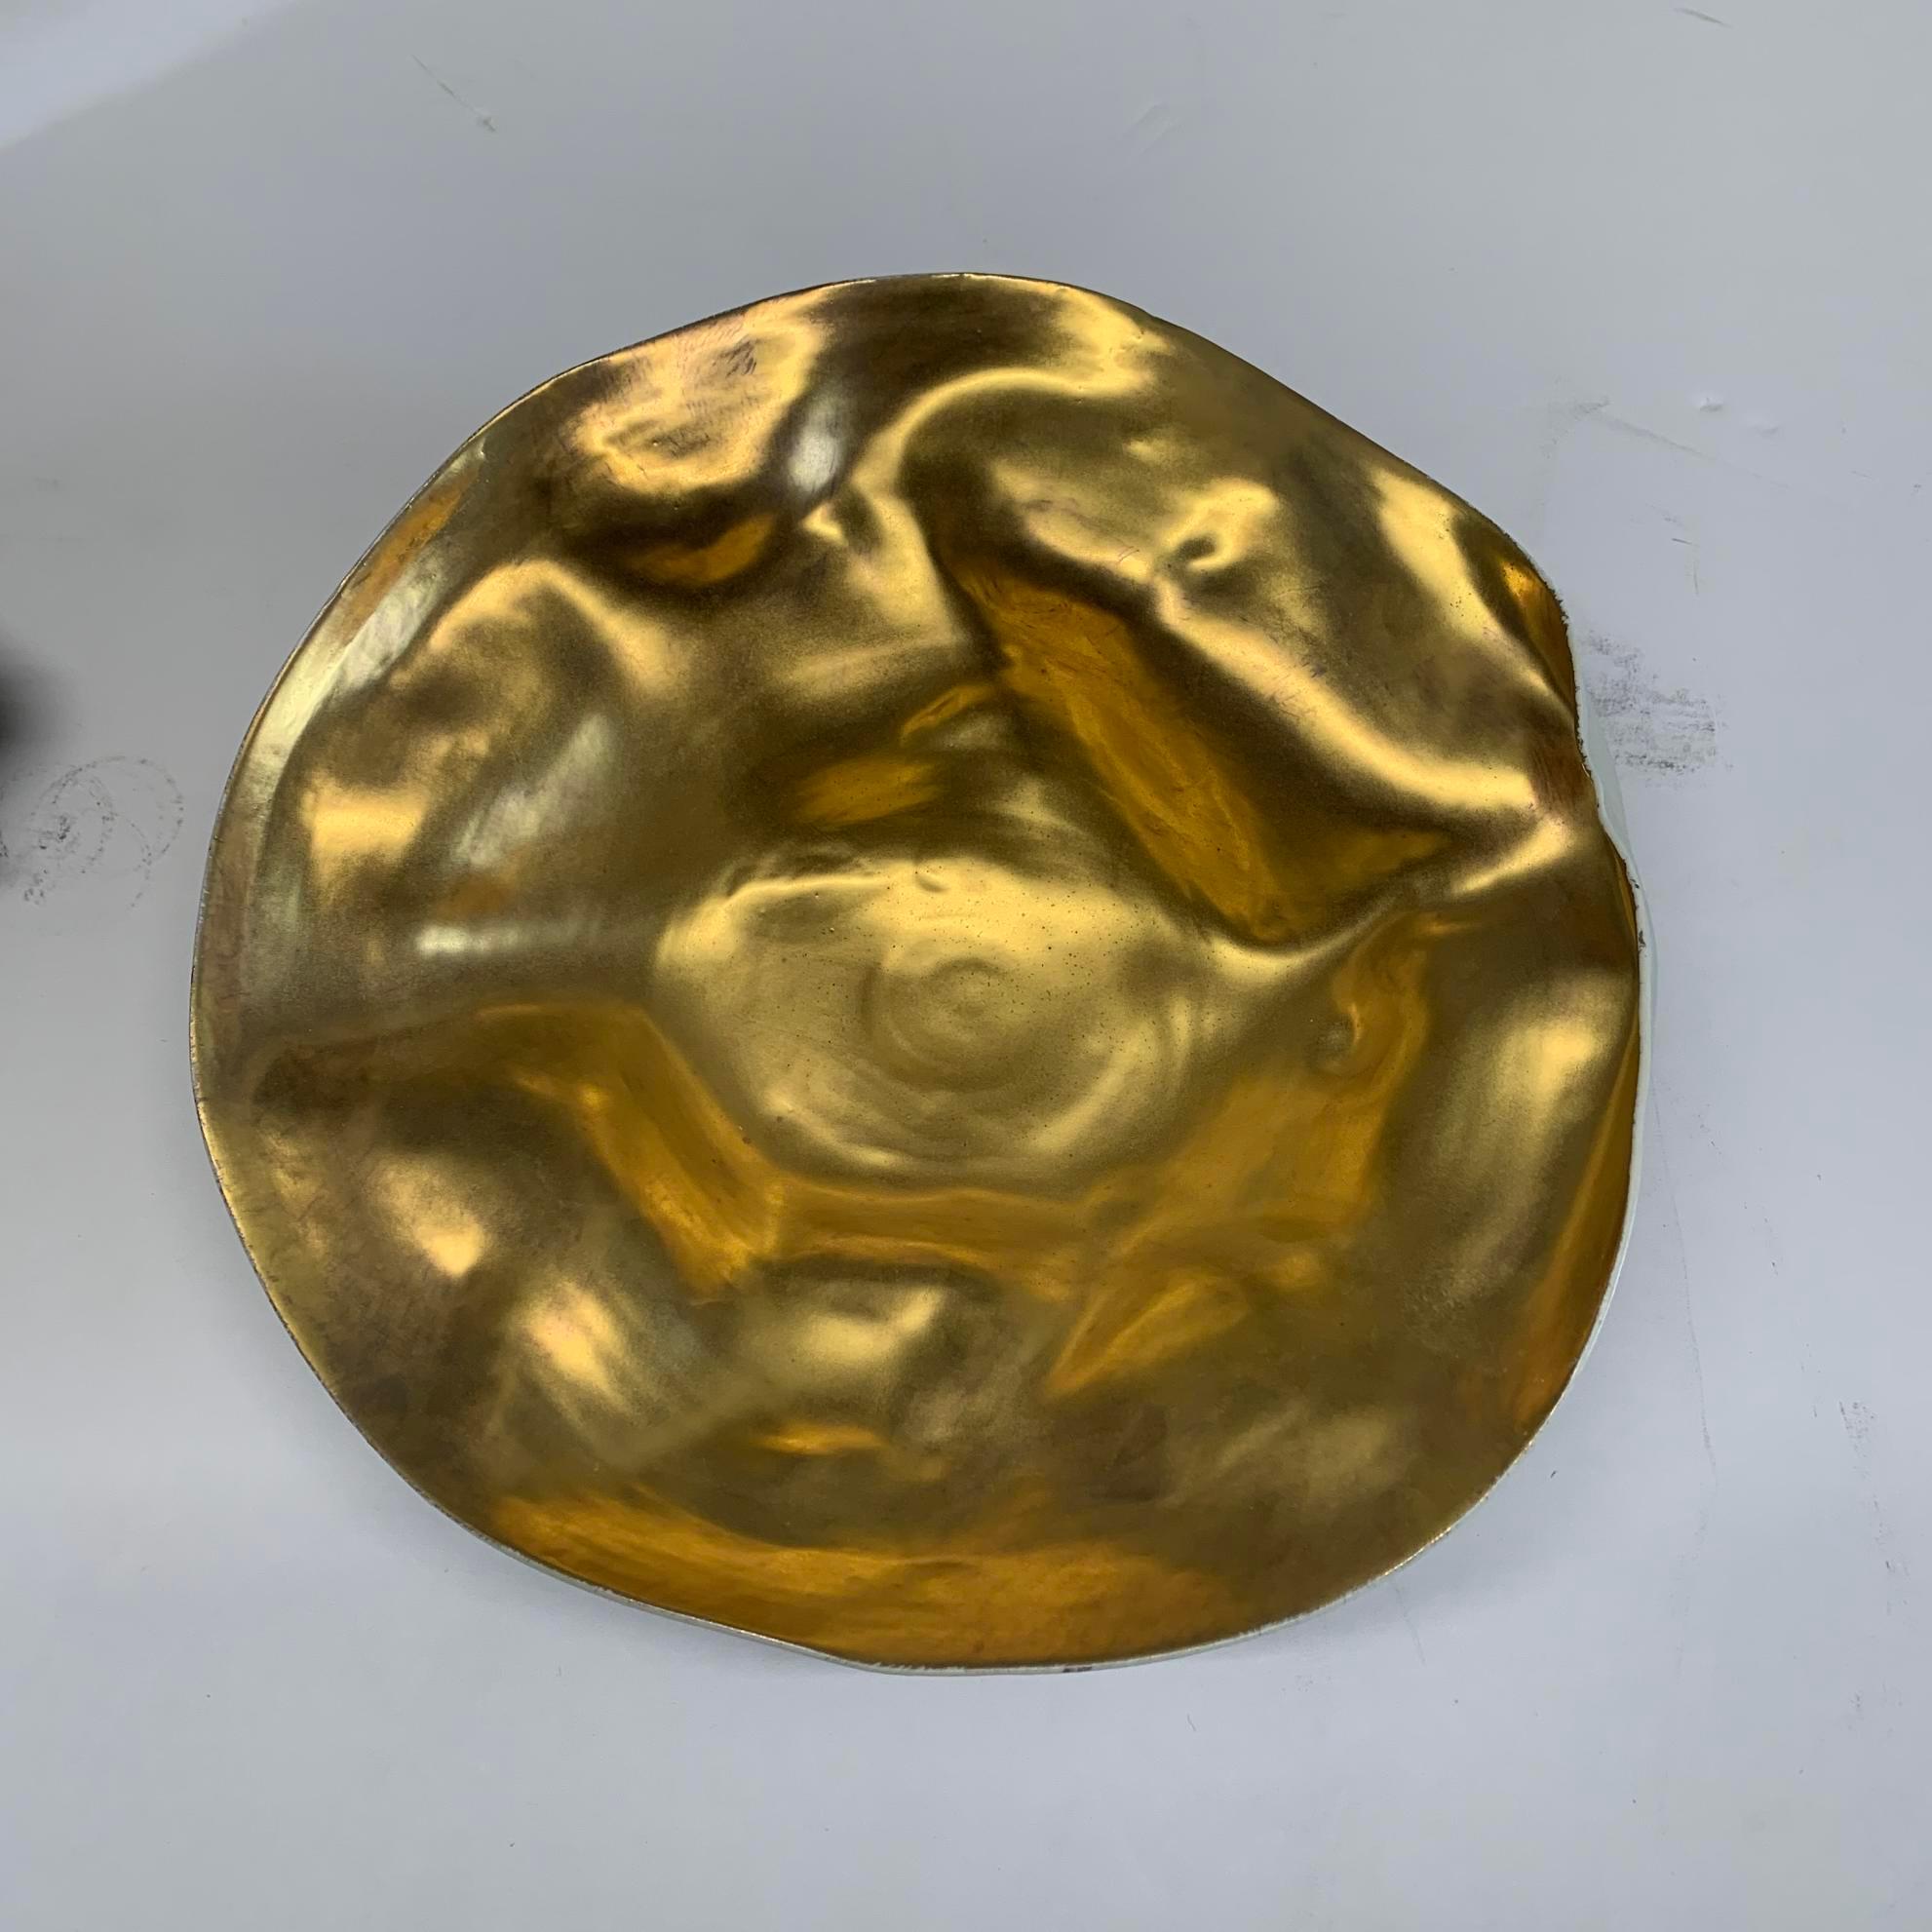 Contemporary Italian handmade large porcelain gold bowl.
18K gold leaf matte glaze interior with matte natural exterior.
Organic free form design.
Small size (S5398Z) and Medium size (S5398) also available.
Also available in three sizes in silver